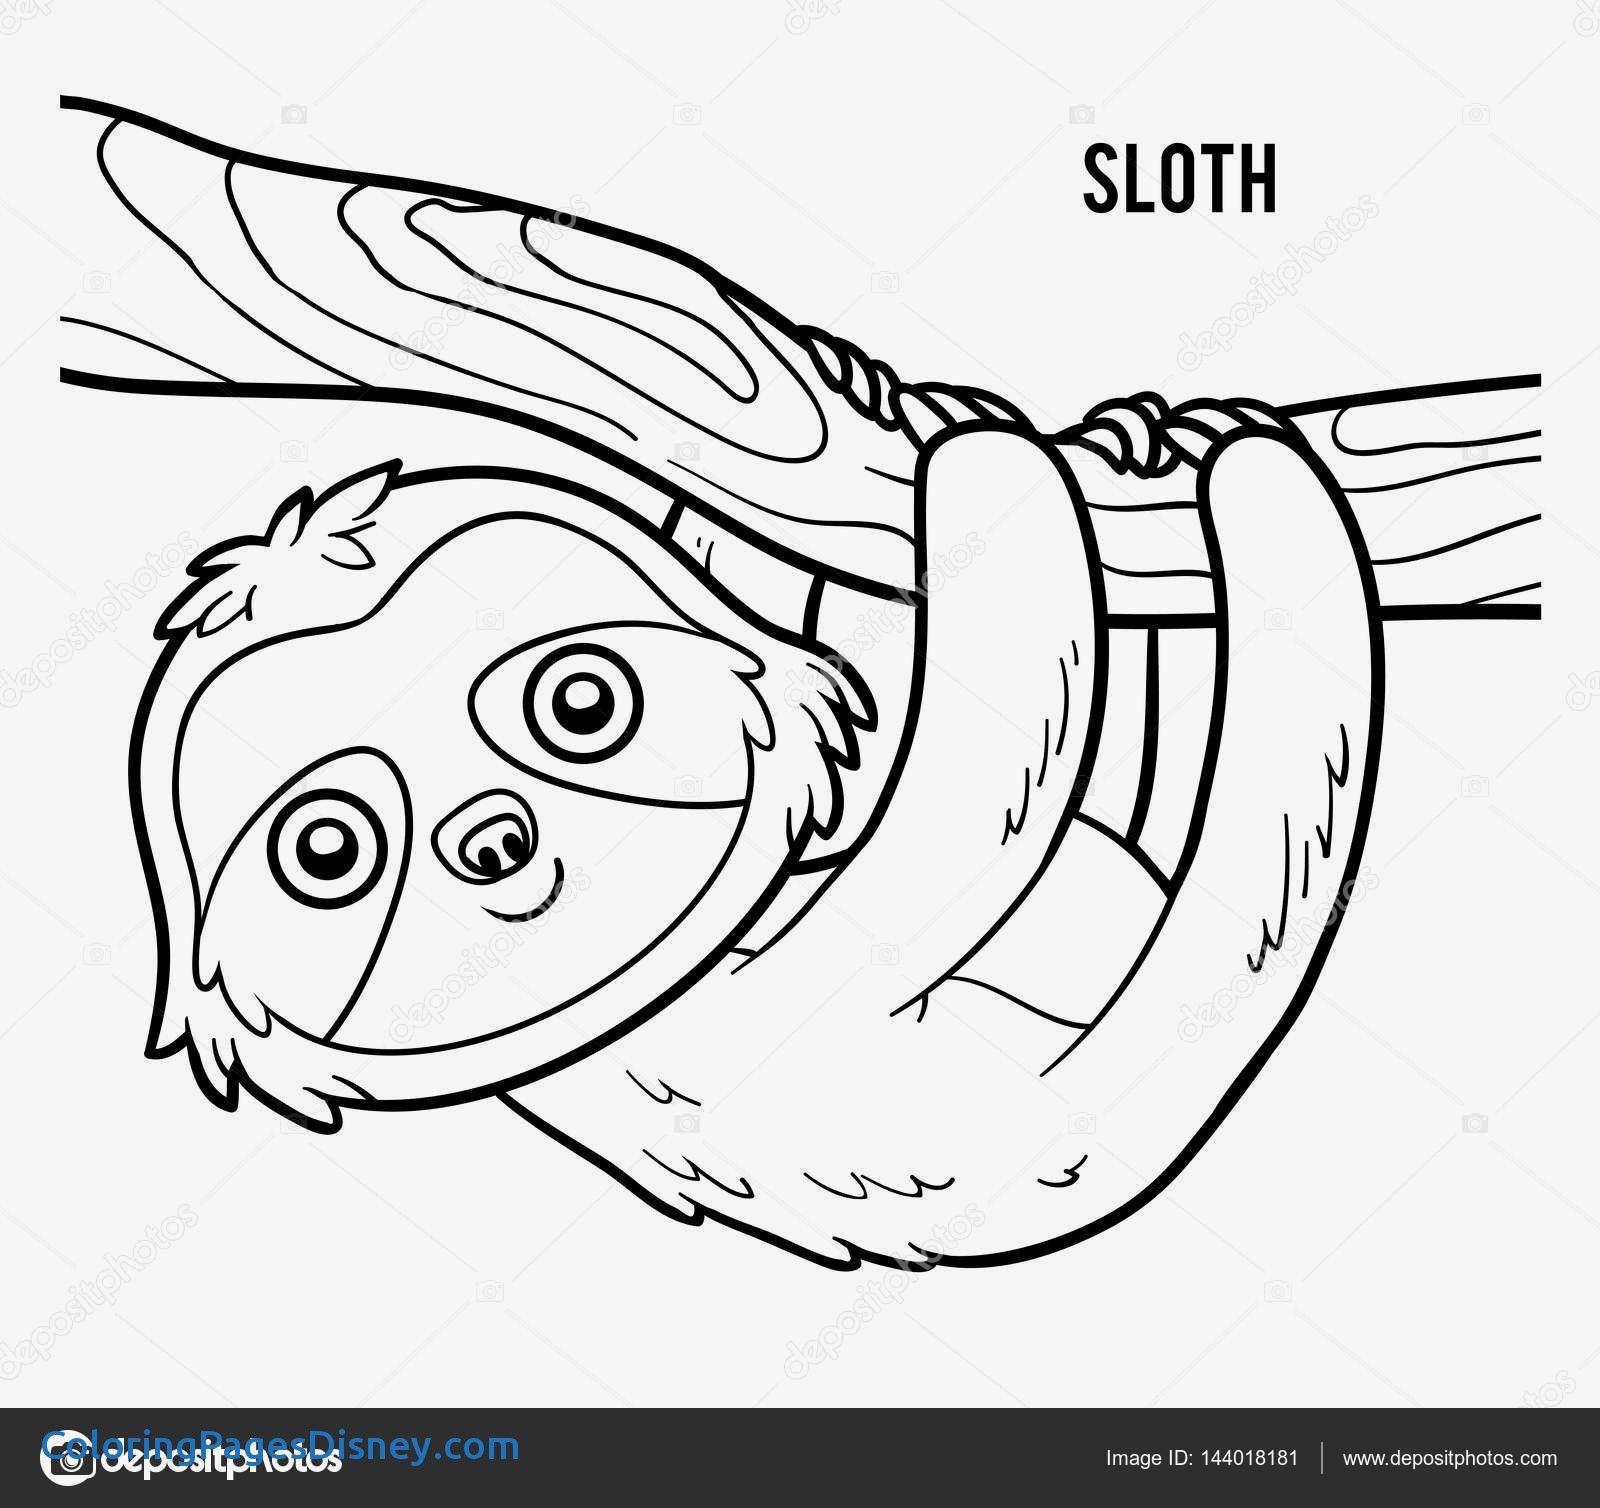 Because sloths are cute and fun to color for kids coloring books coloring pictures coloring pages to print